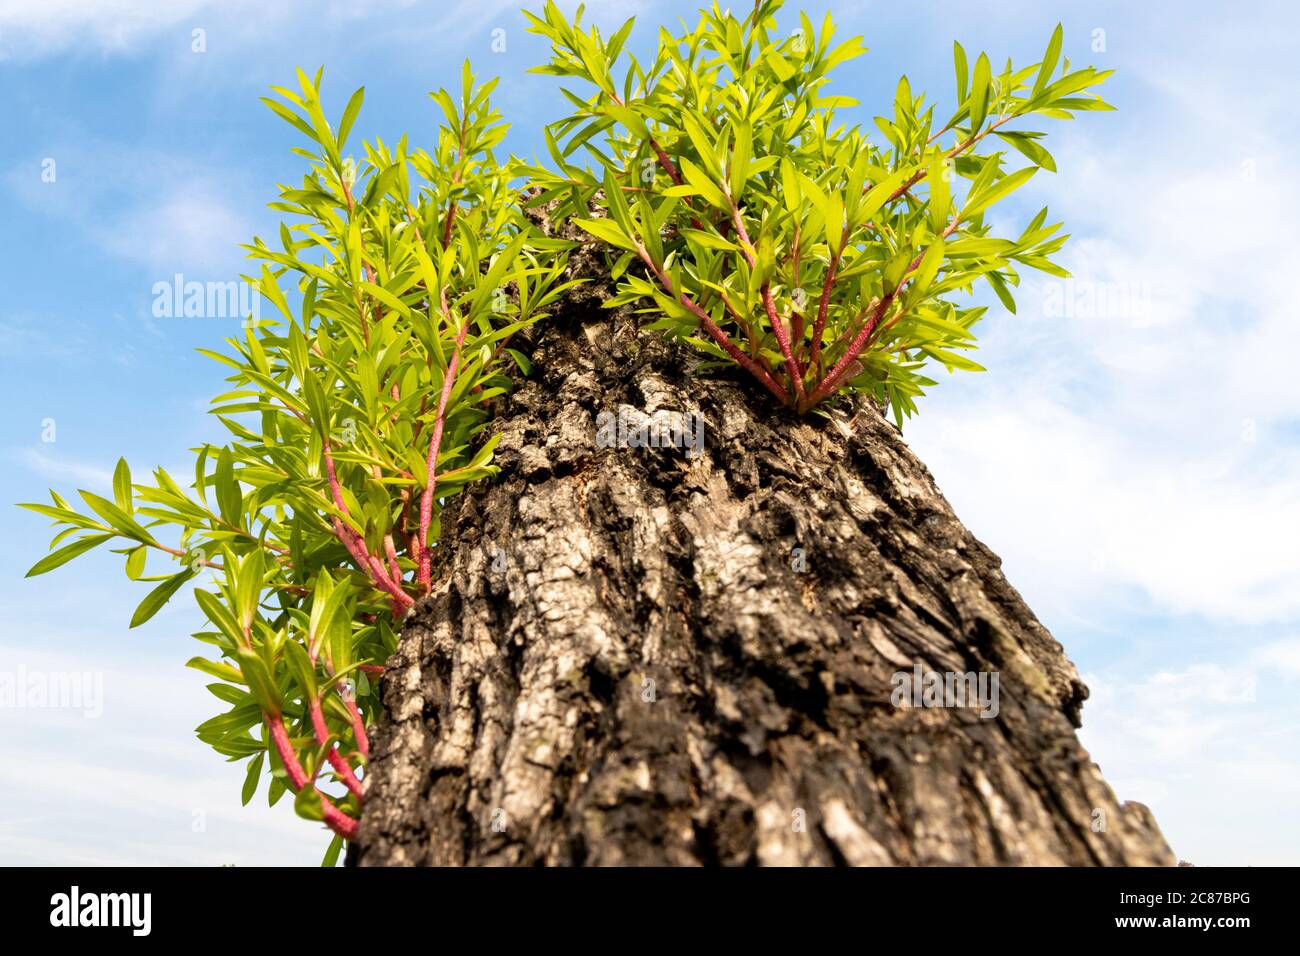 Pruned branch of a tree growing fresh new leaves, tree and plant care, pruned tree budding Stock Photo